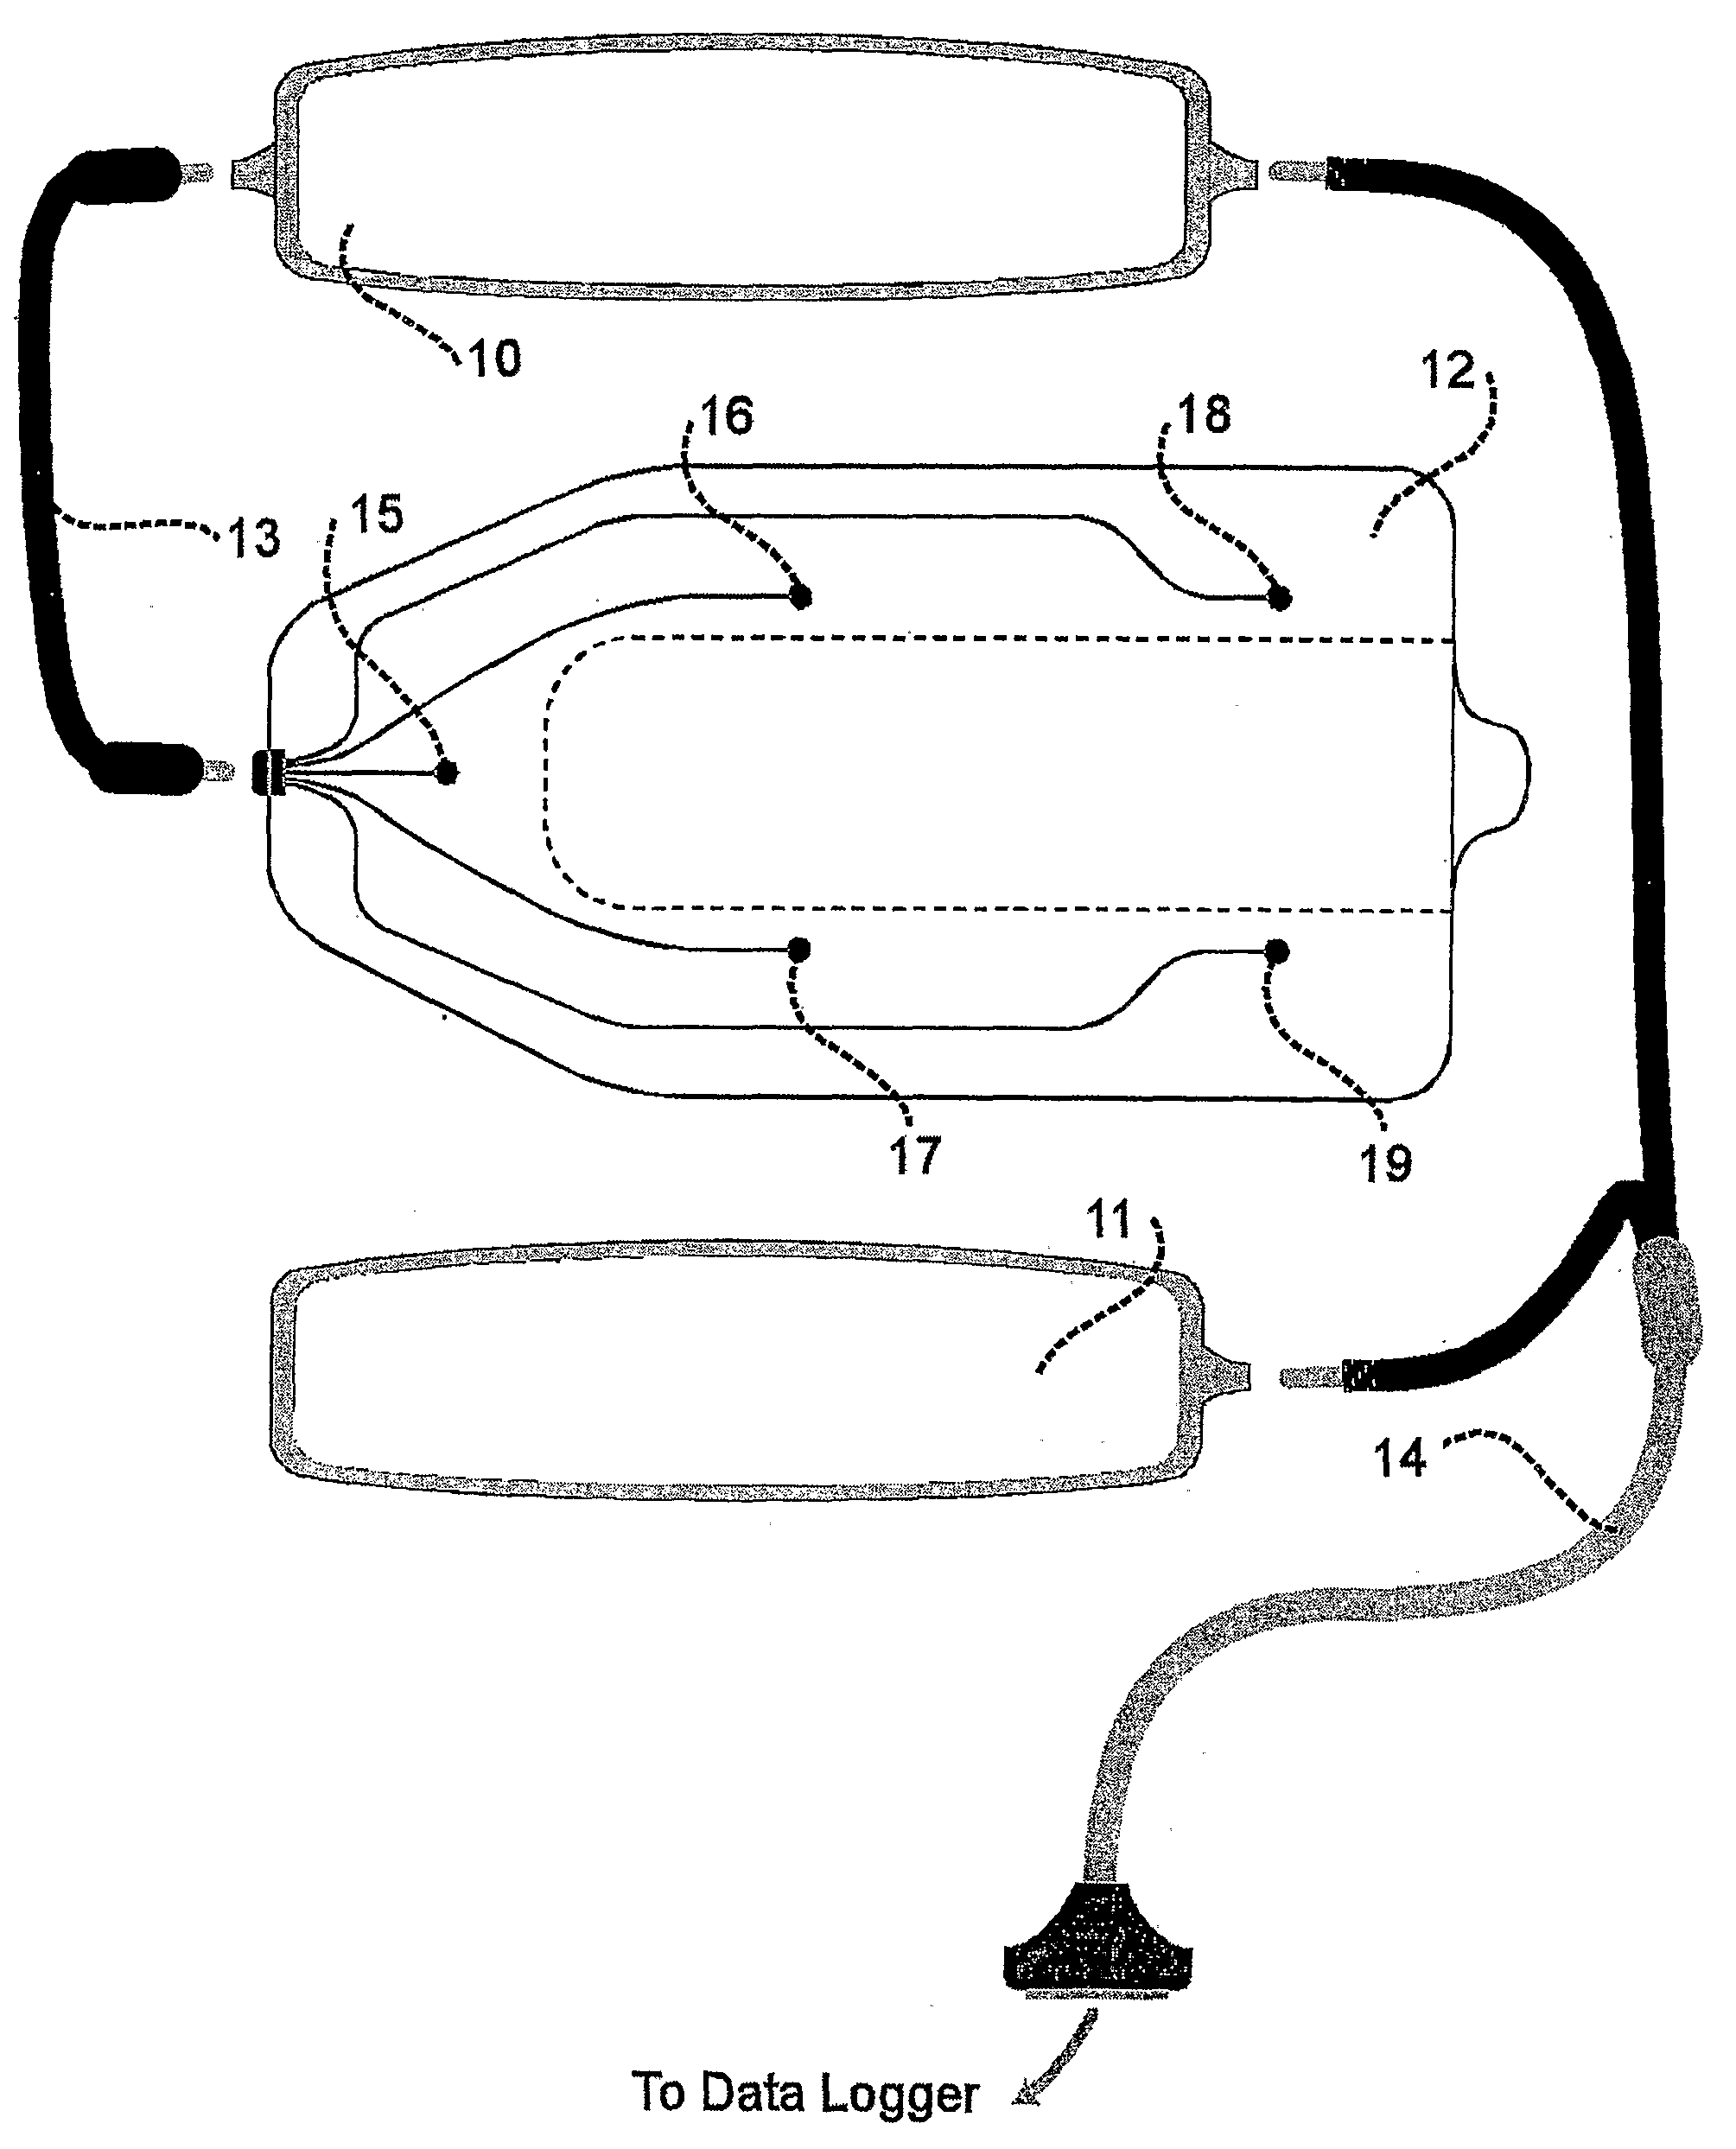 Apparatus and Method for Monitoring and/or Load Applied to a Mammal